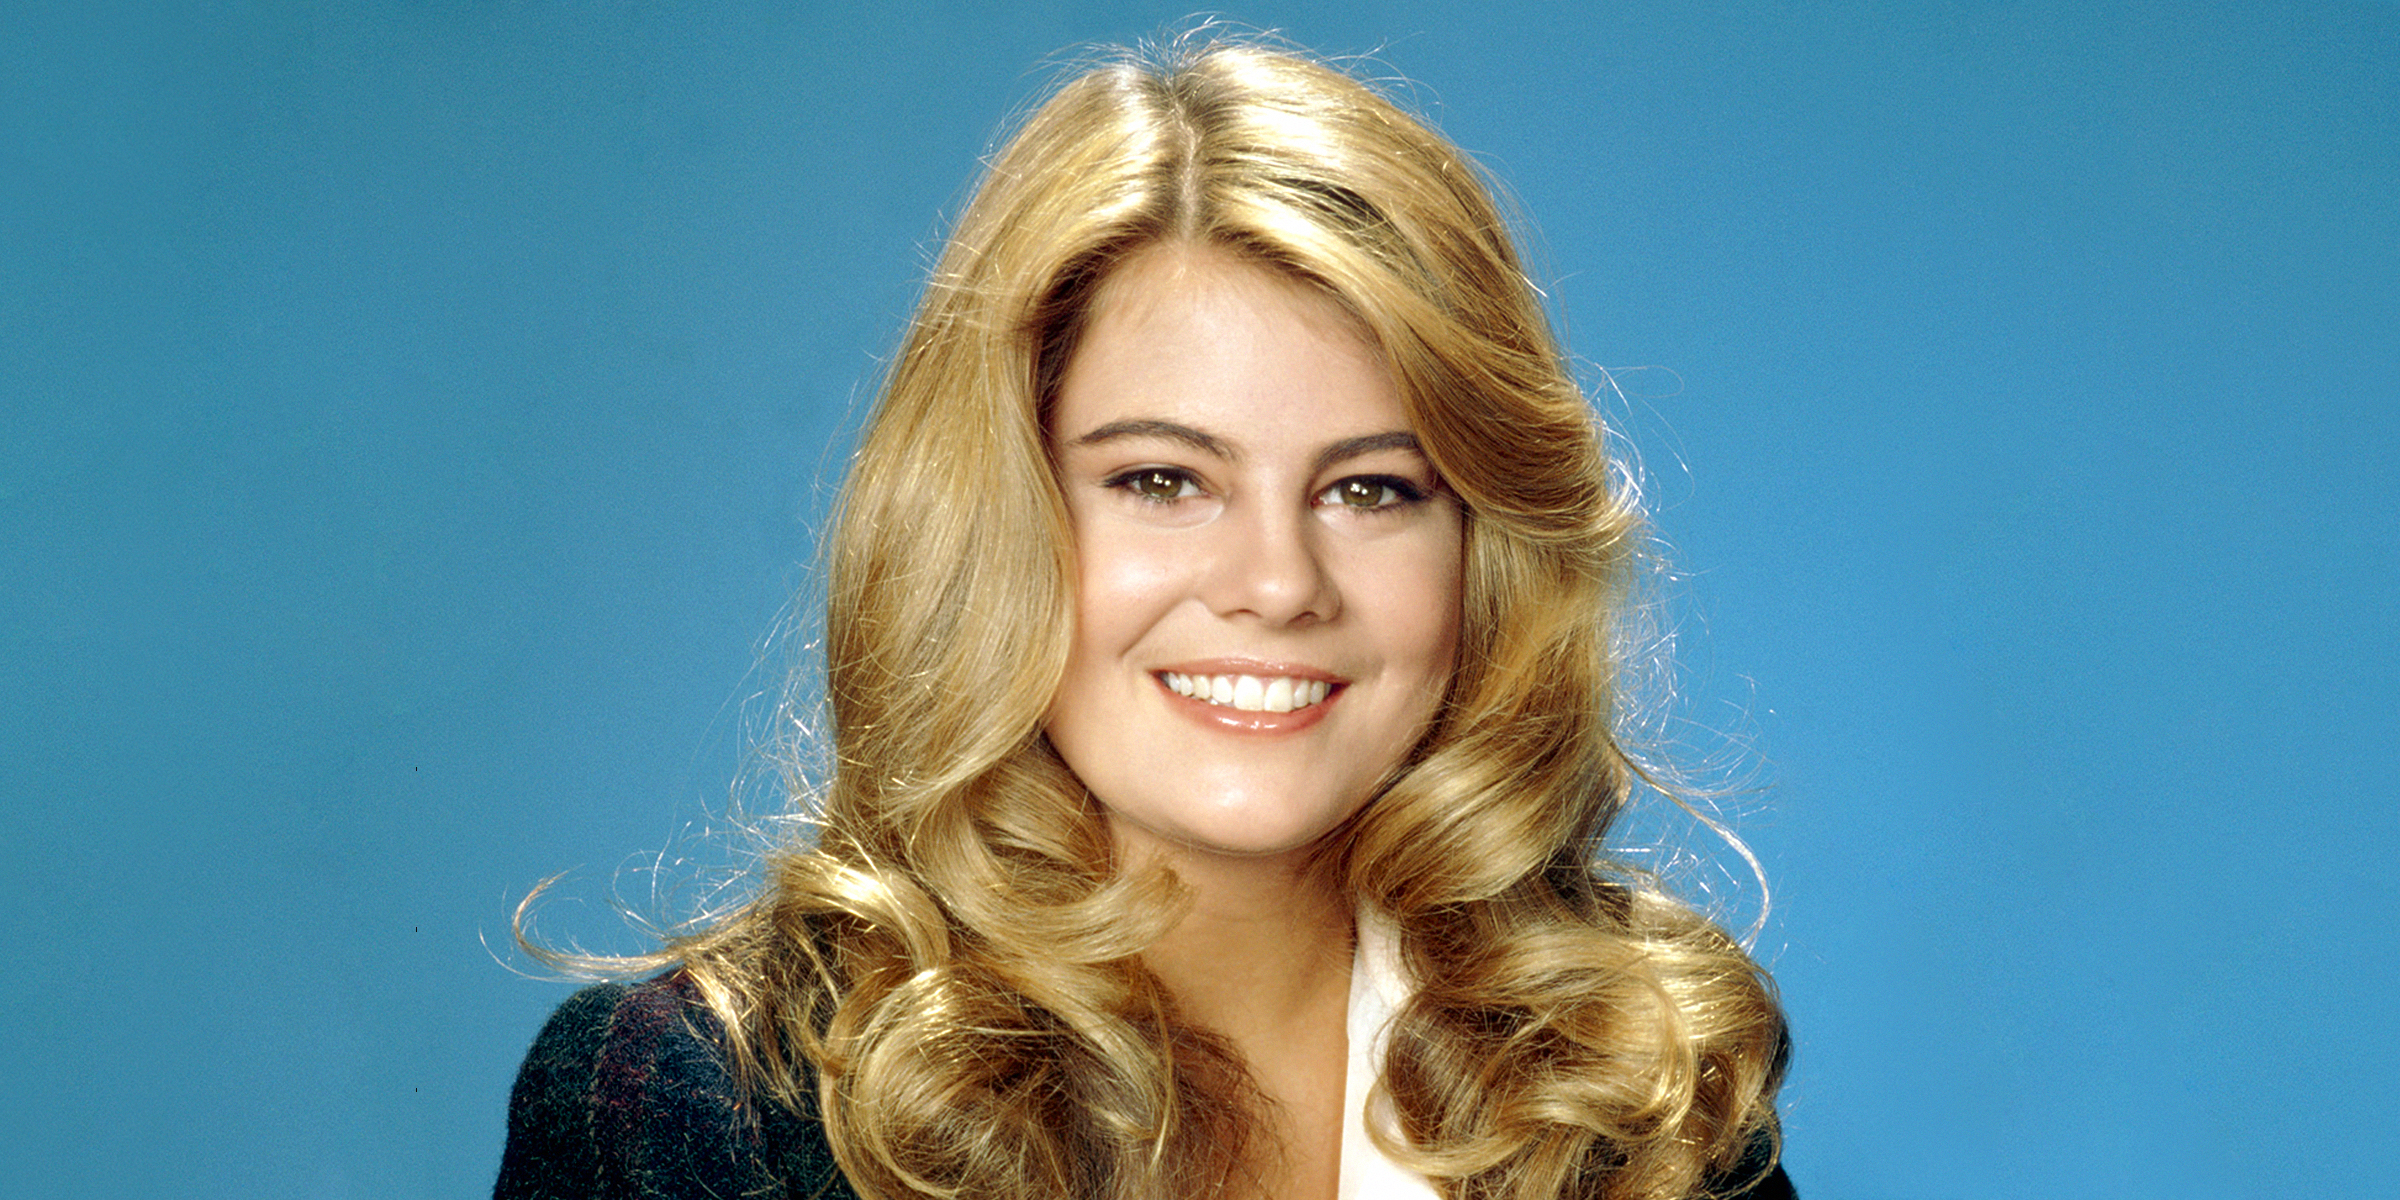 Lisa Whelchel | Source: Getty Images